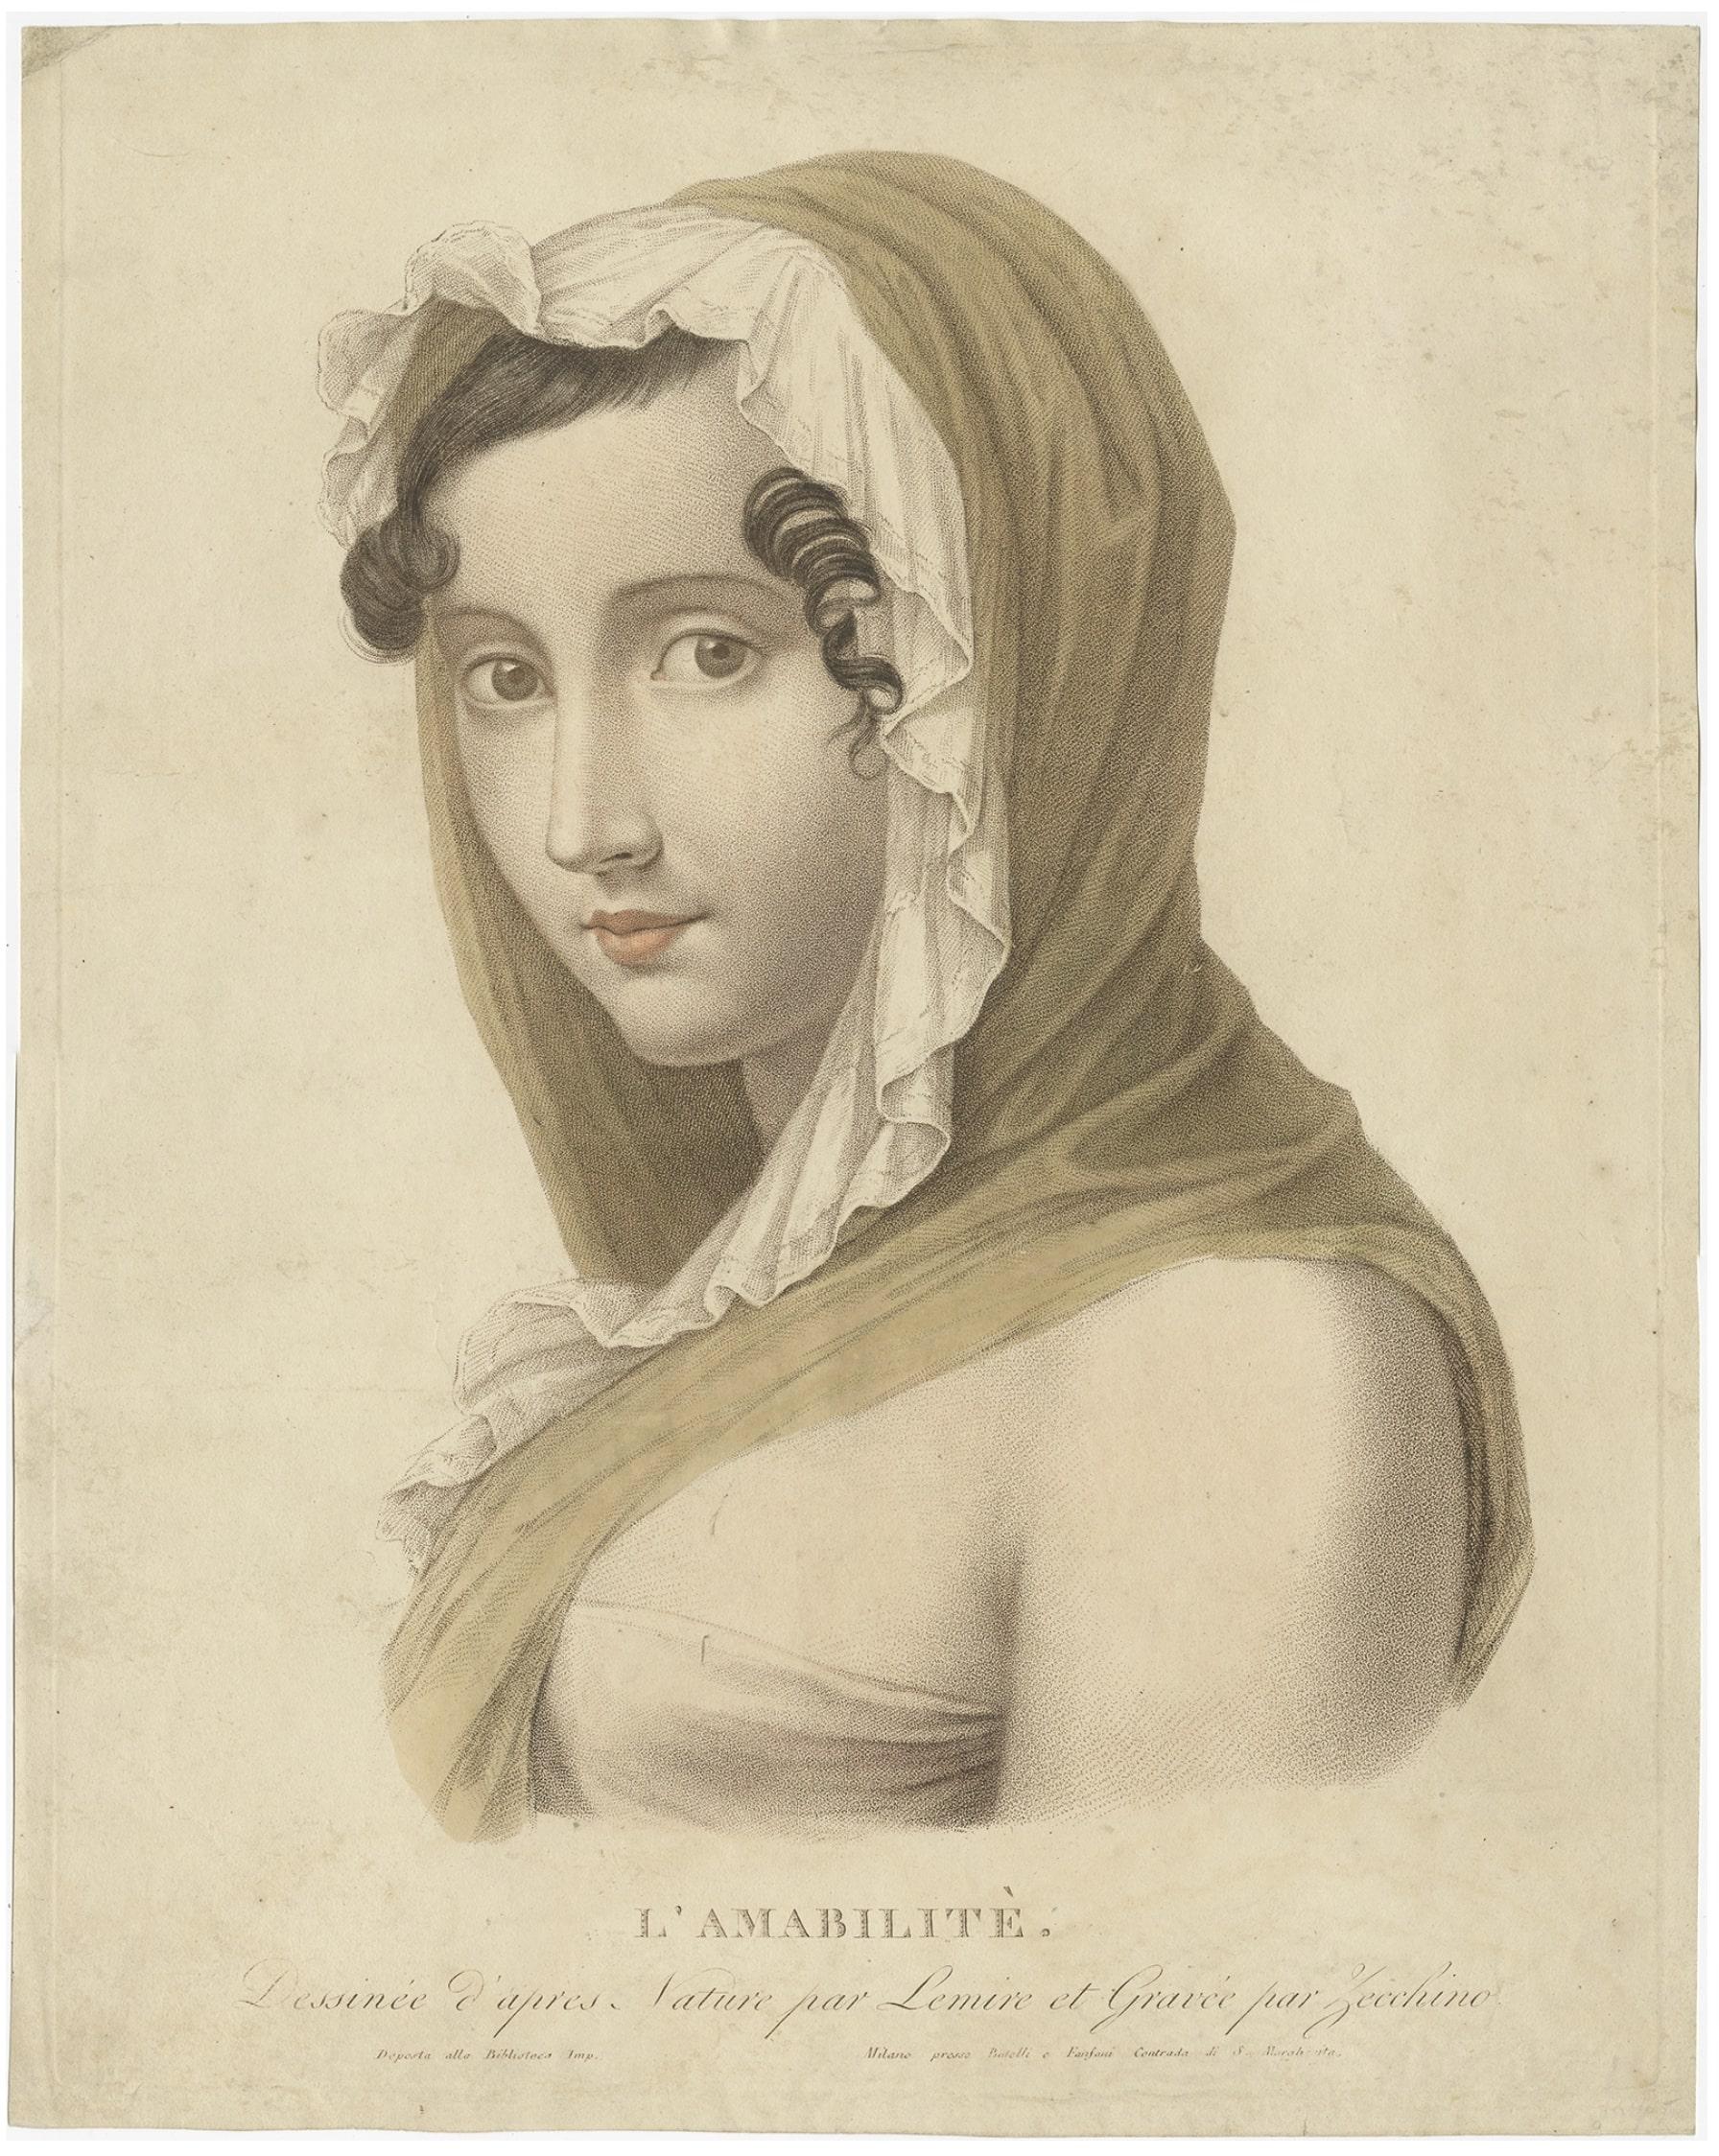 Antique print titled 'L'Amabilité'. 

Old stipple engraving depicting a young woman personifying 'kindness'. 

Artists and Engravers: Engraved by Zecchino after A. Lemire. 

Condition: Good, general age-related toning. Some wear, please study